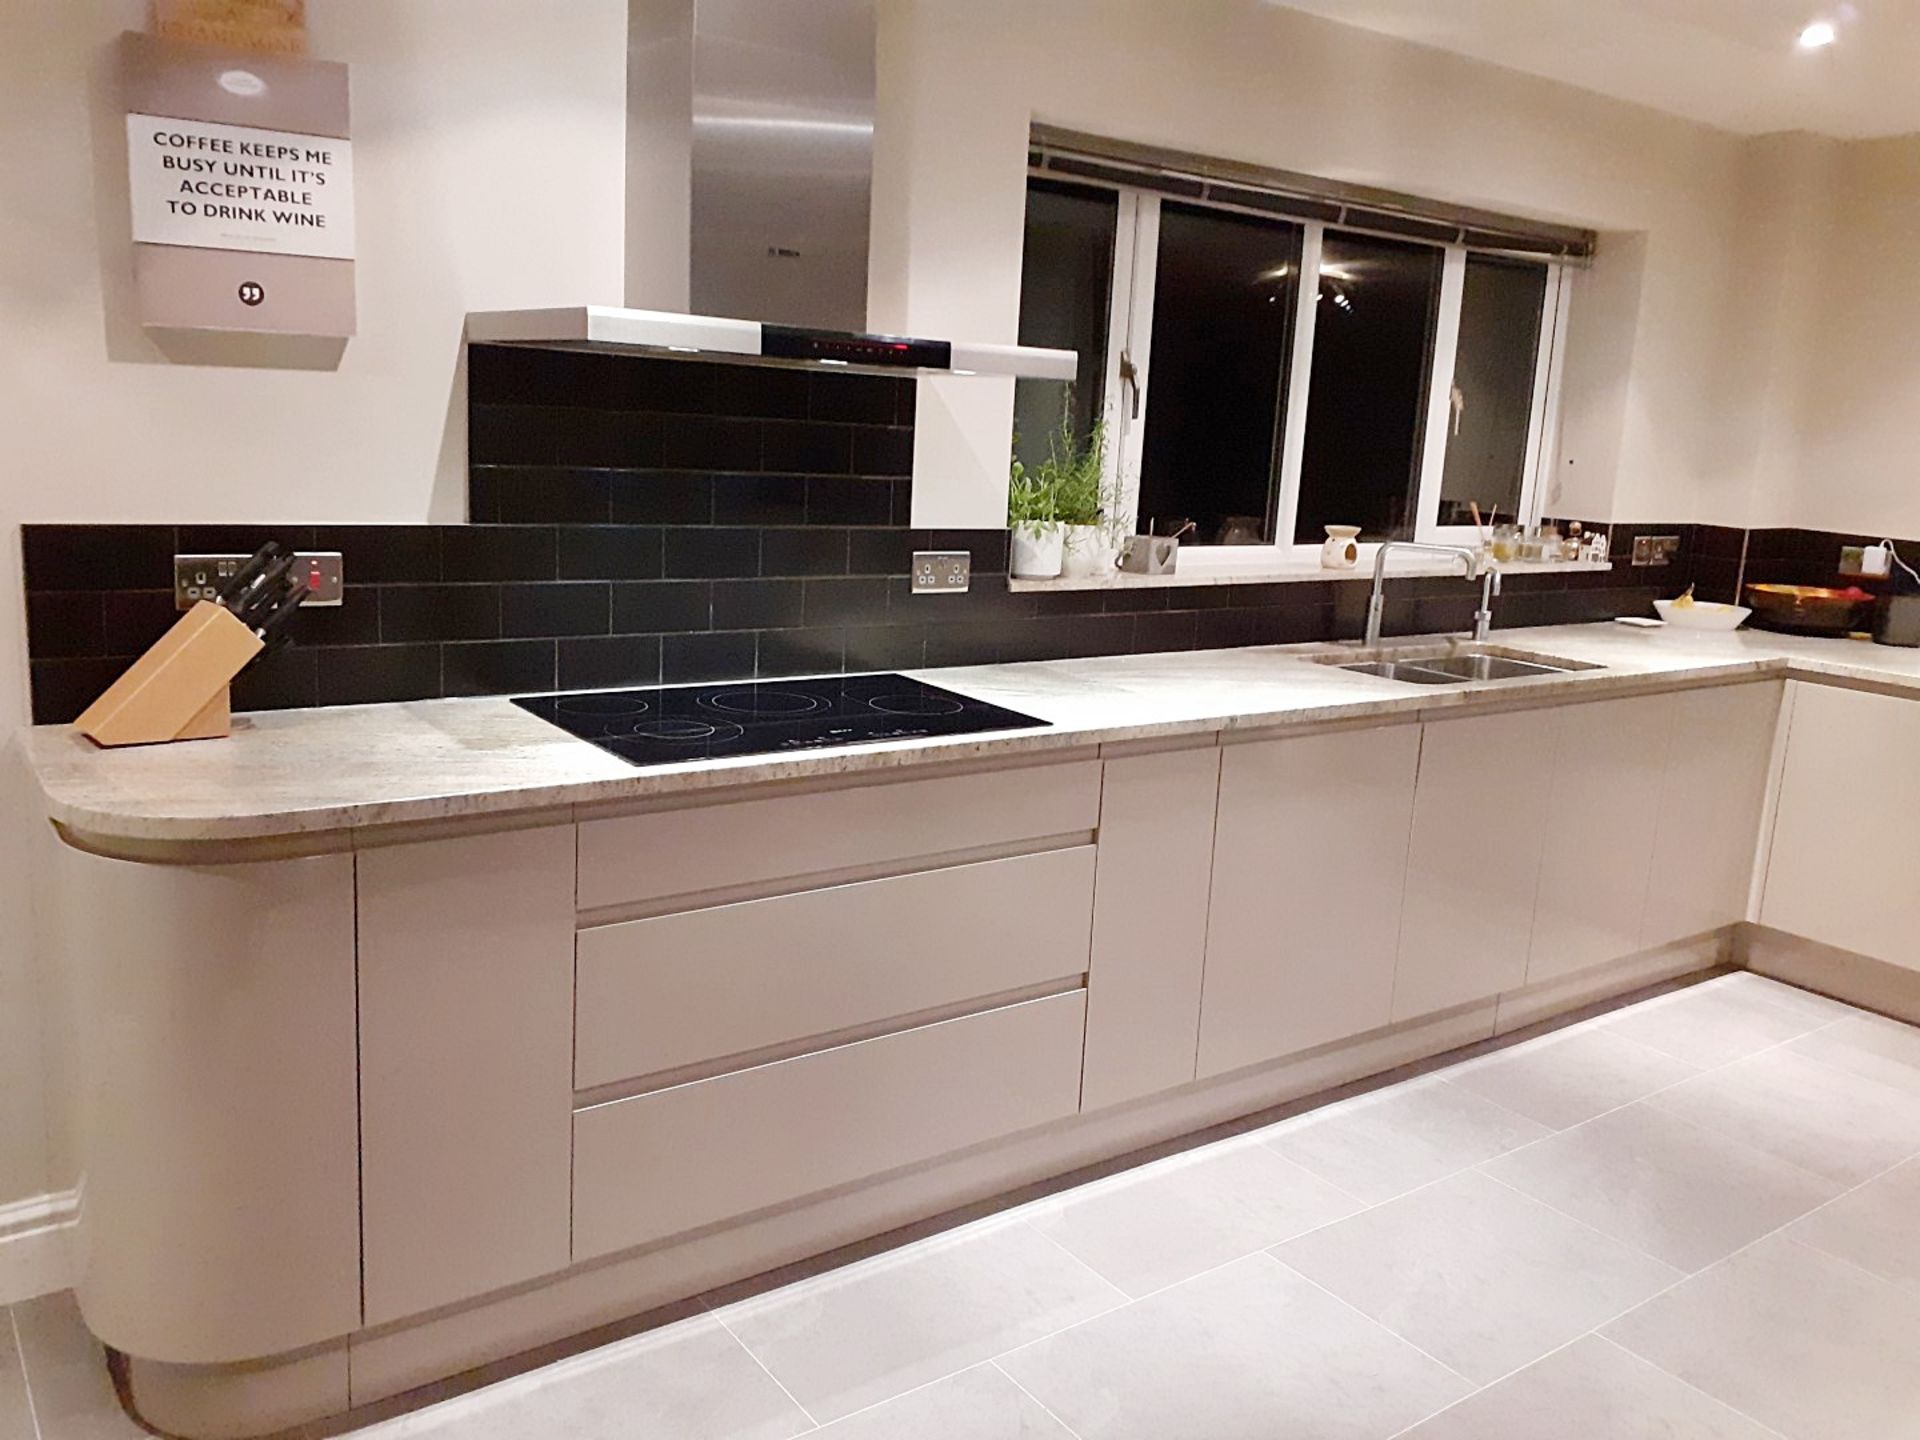 1 x Fitted Kitchen With A Sleek Handleless Design, Integrated Bosch Appliances + Granite Worktops - Image 12 of 69